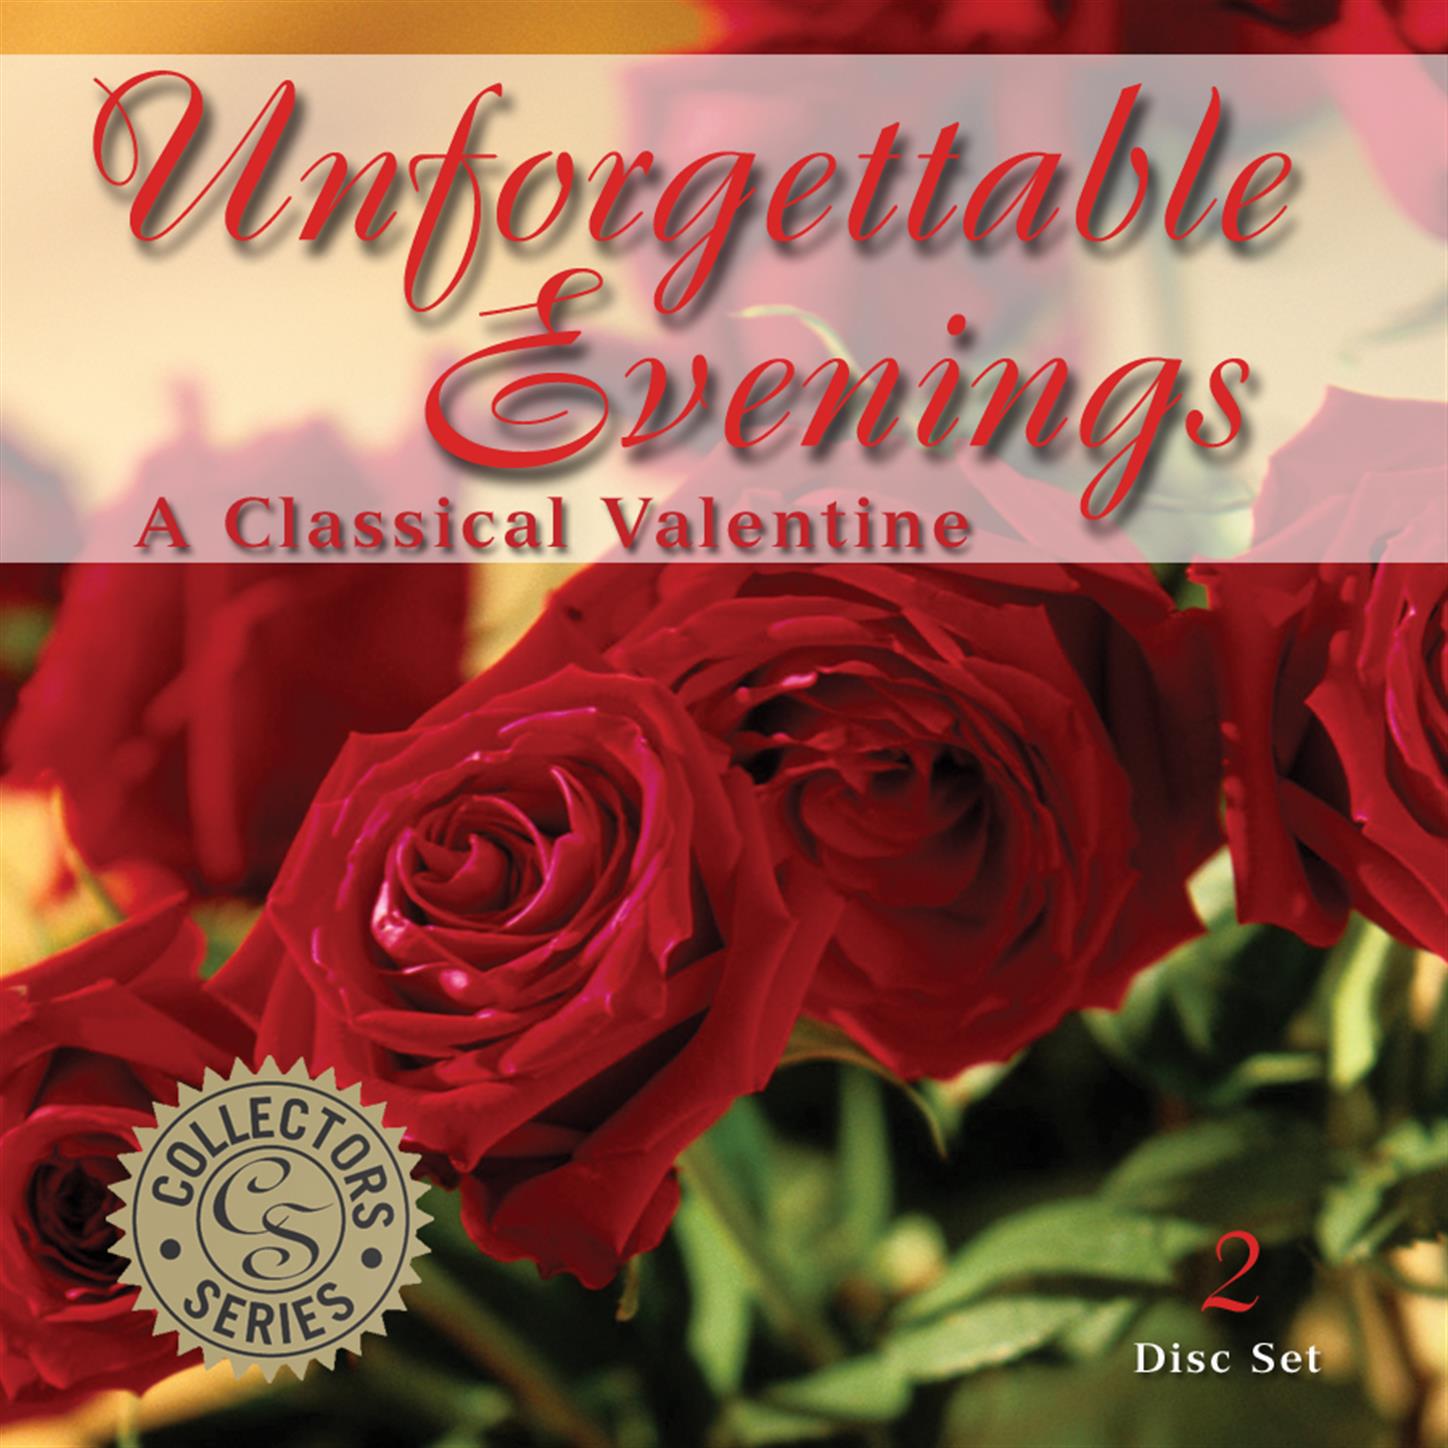 Unforgettable Evenings: A Classical Valentine